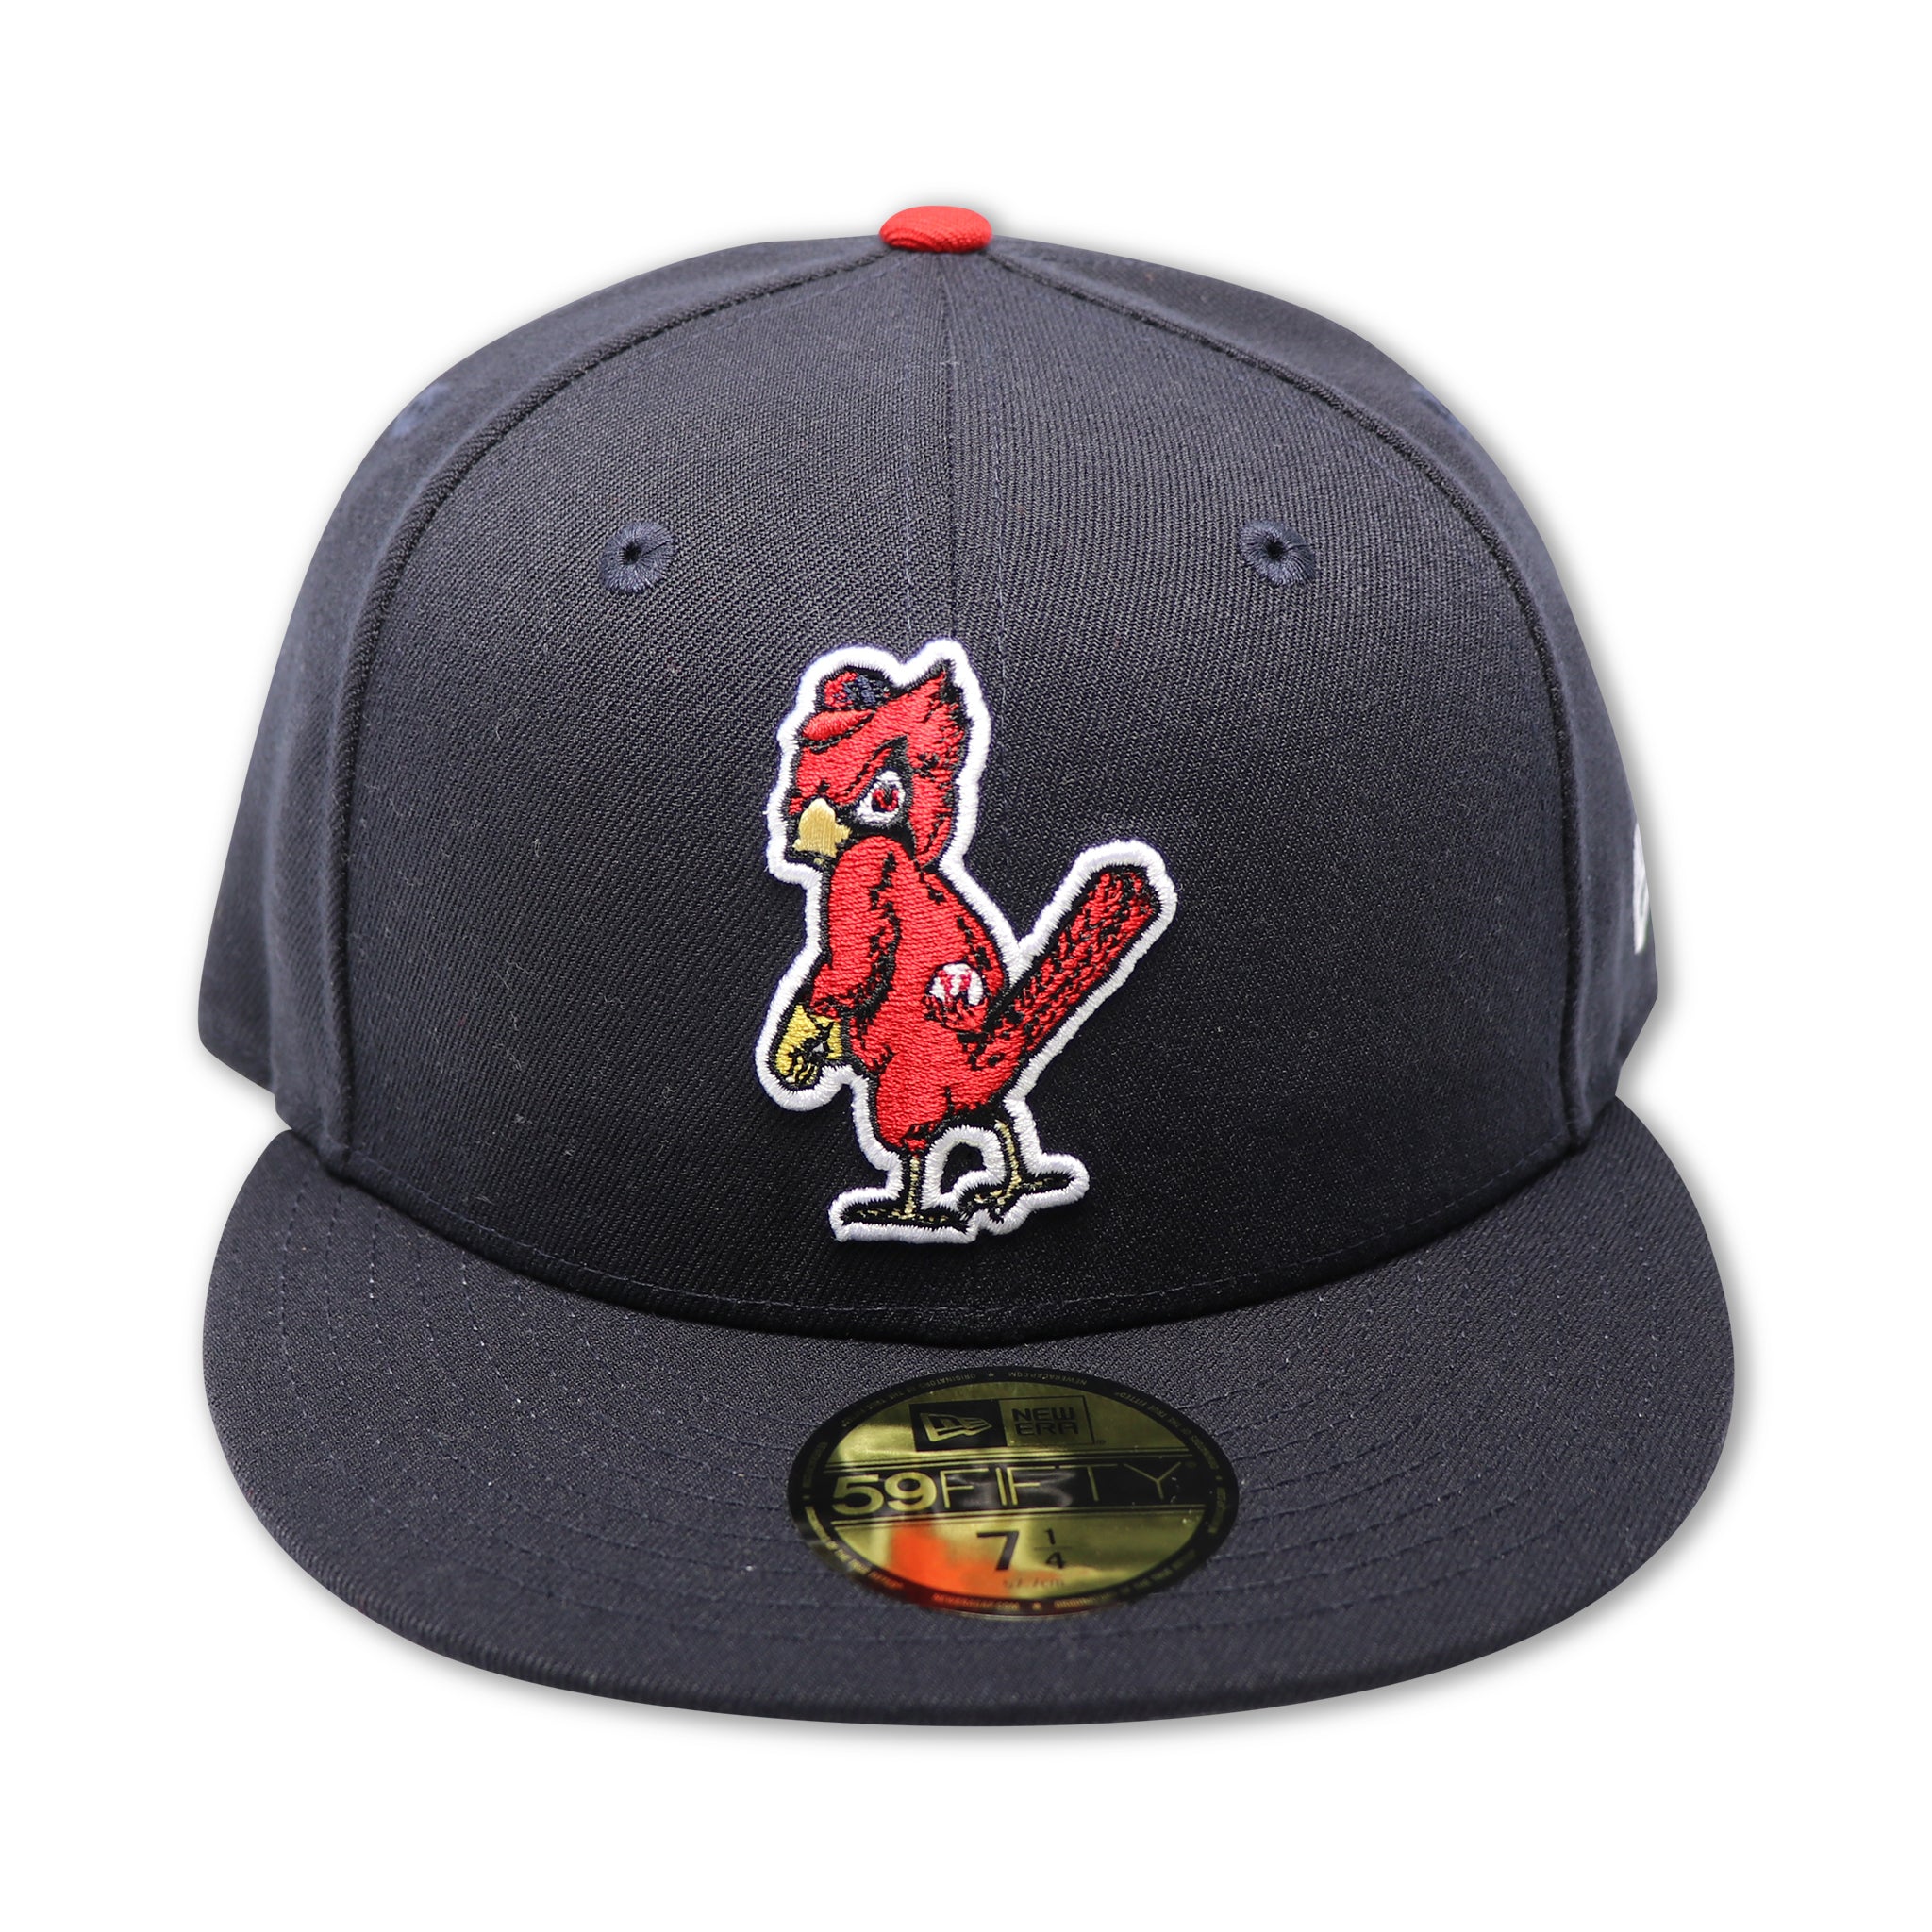 ST. LOUIS CARDINALS (NAVY) NEW ERA 59FIFTY FITTED (GREY BOTTOM)